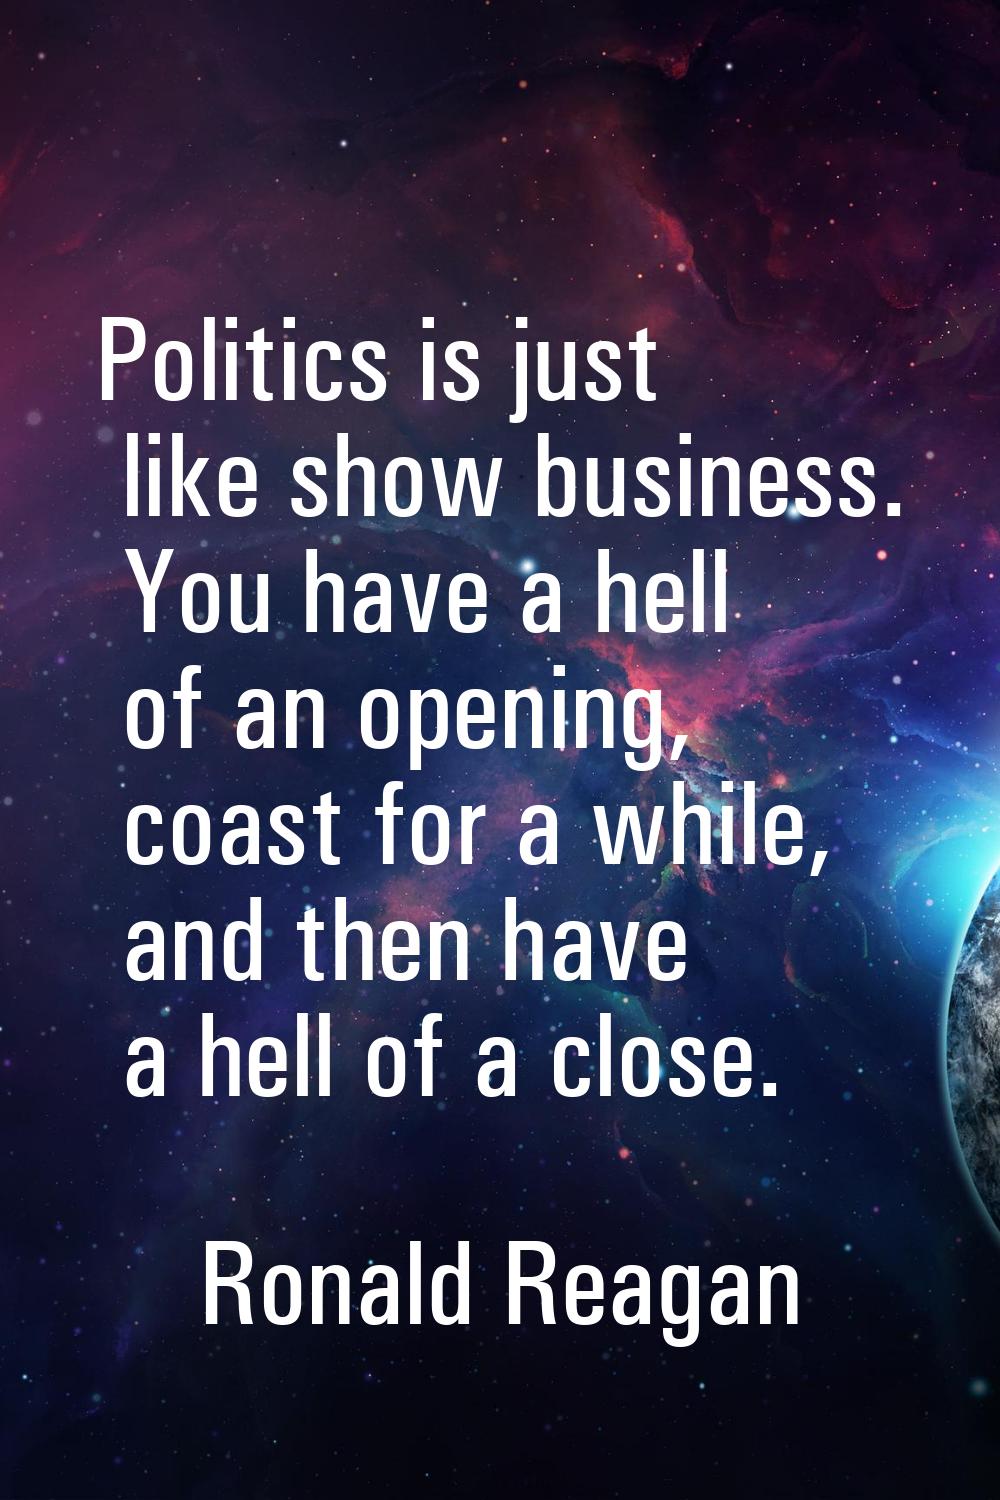 Politics is just like show business. You have a hell of an opening, coast for a while, and then hav